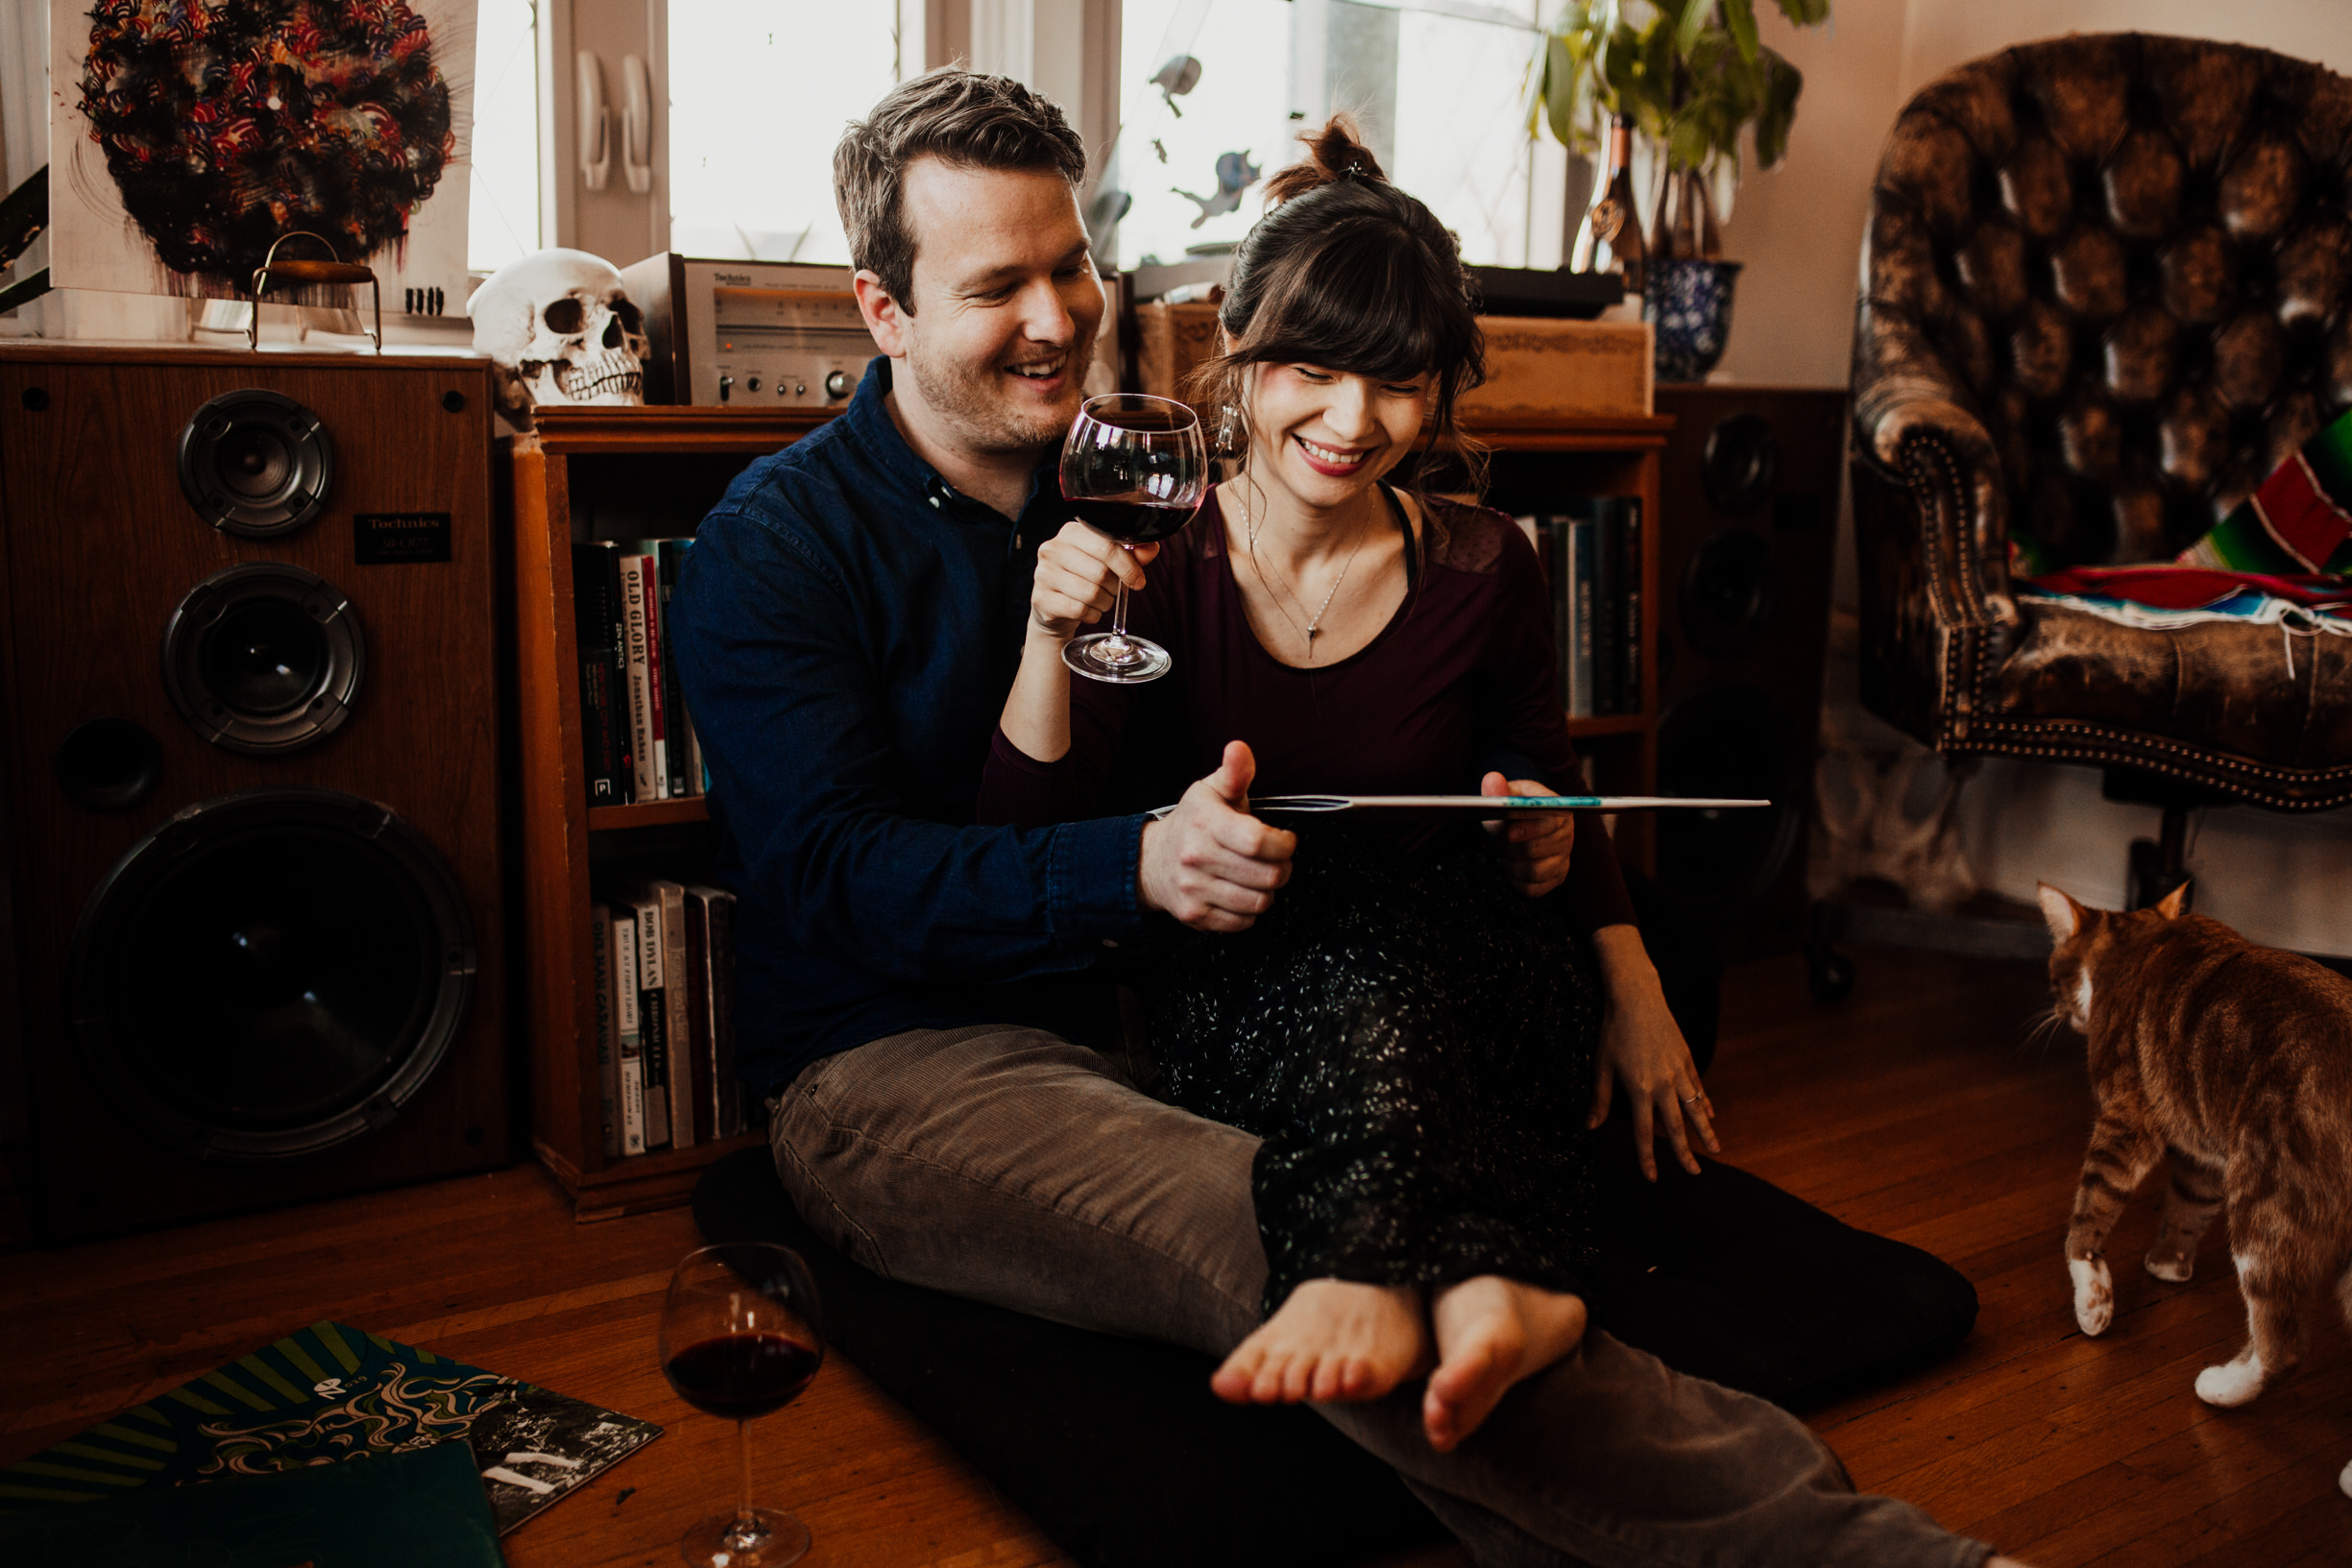 louisville-engagement-photographer-record-store-in-home-session-crystal-ludwick-photo (3 of 53).jpg